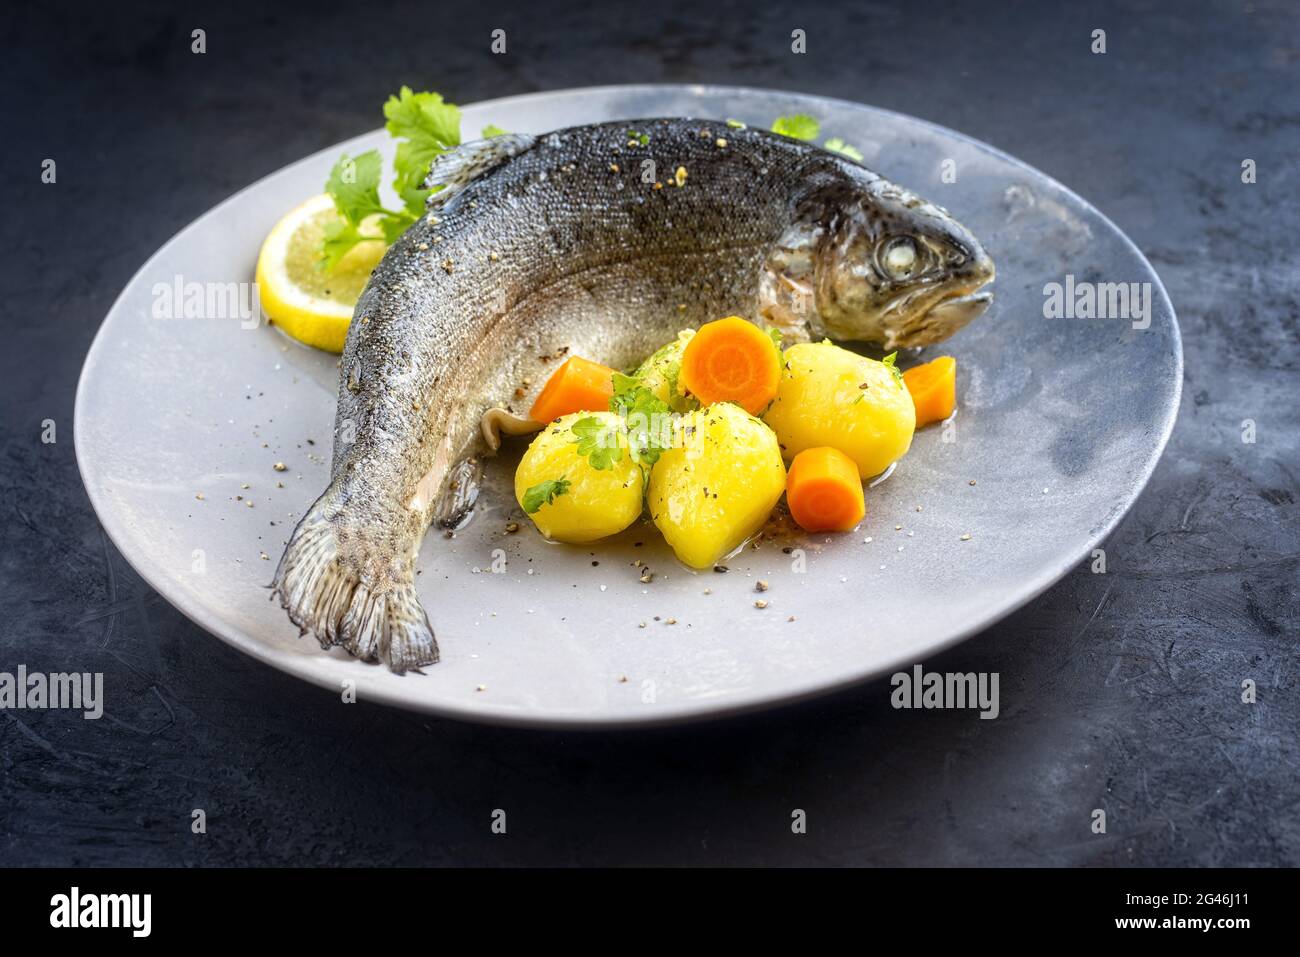 Modern style traditional steamed rainbow trout with boiled potatoes and carrot slices offered as close-up on a design plate Stock Photo